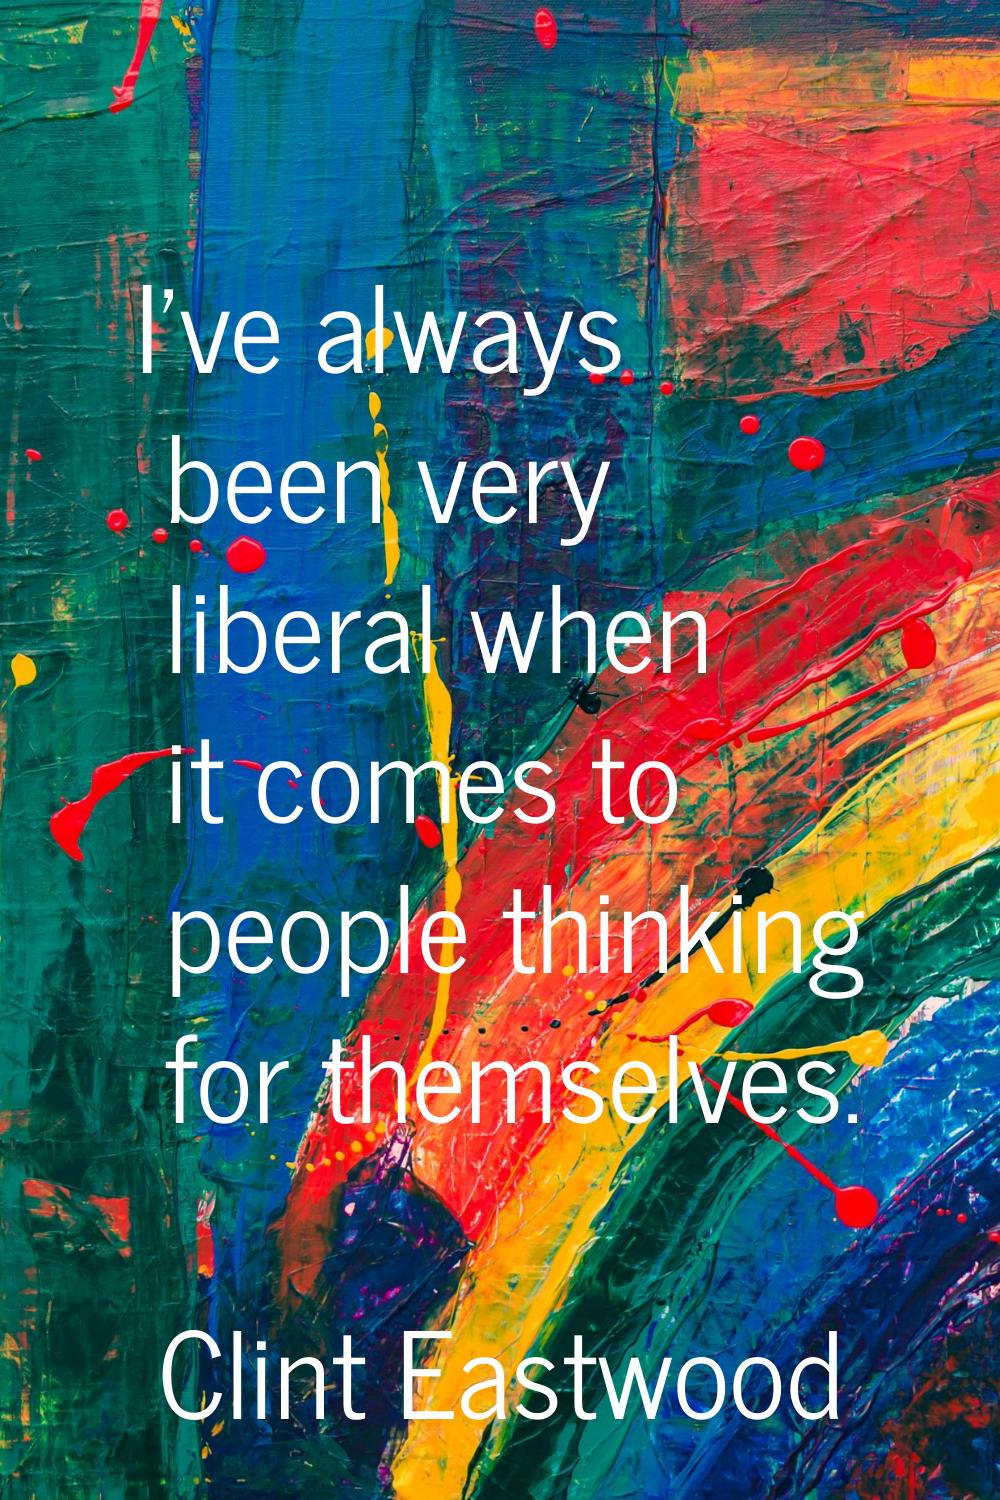 I've always been very liberal when it comes to people thinking for themselves.